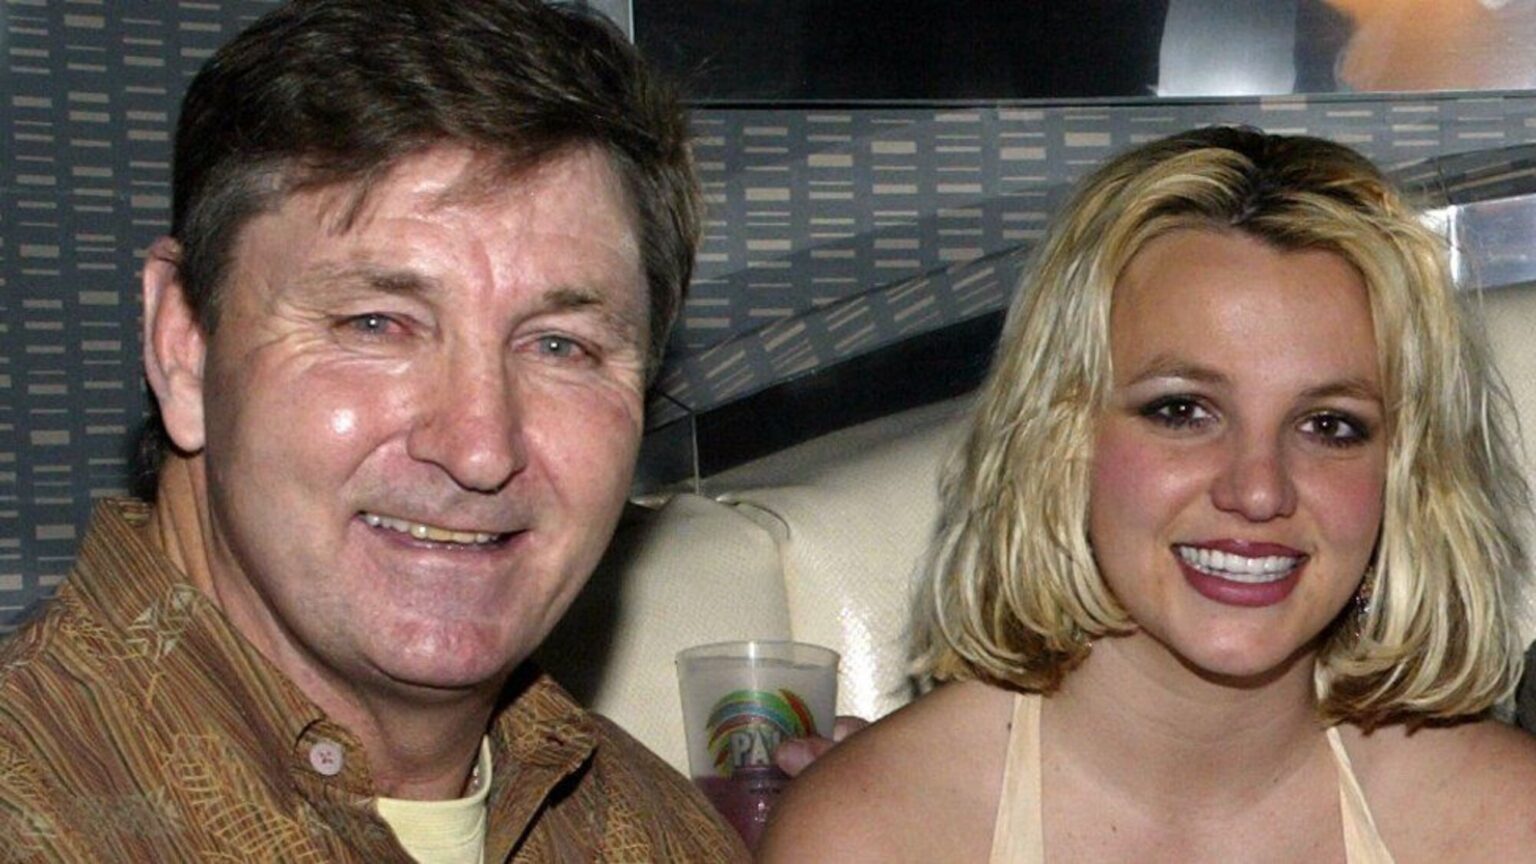 Could the famous 2000s pop singer finally be free? Find out if the father of Britney Spears is truly ready to give up, or if he has darker intentions here.